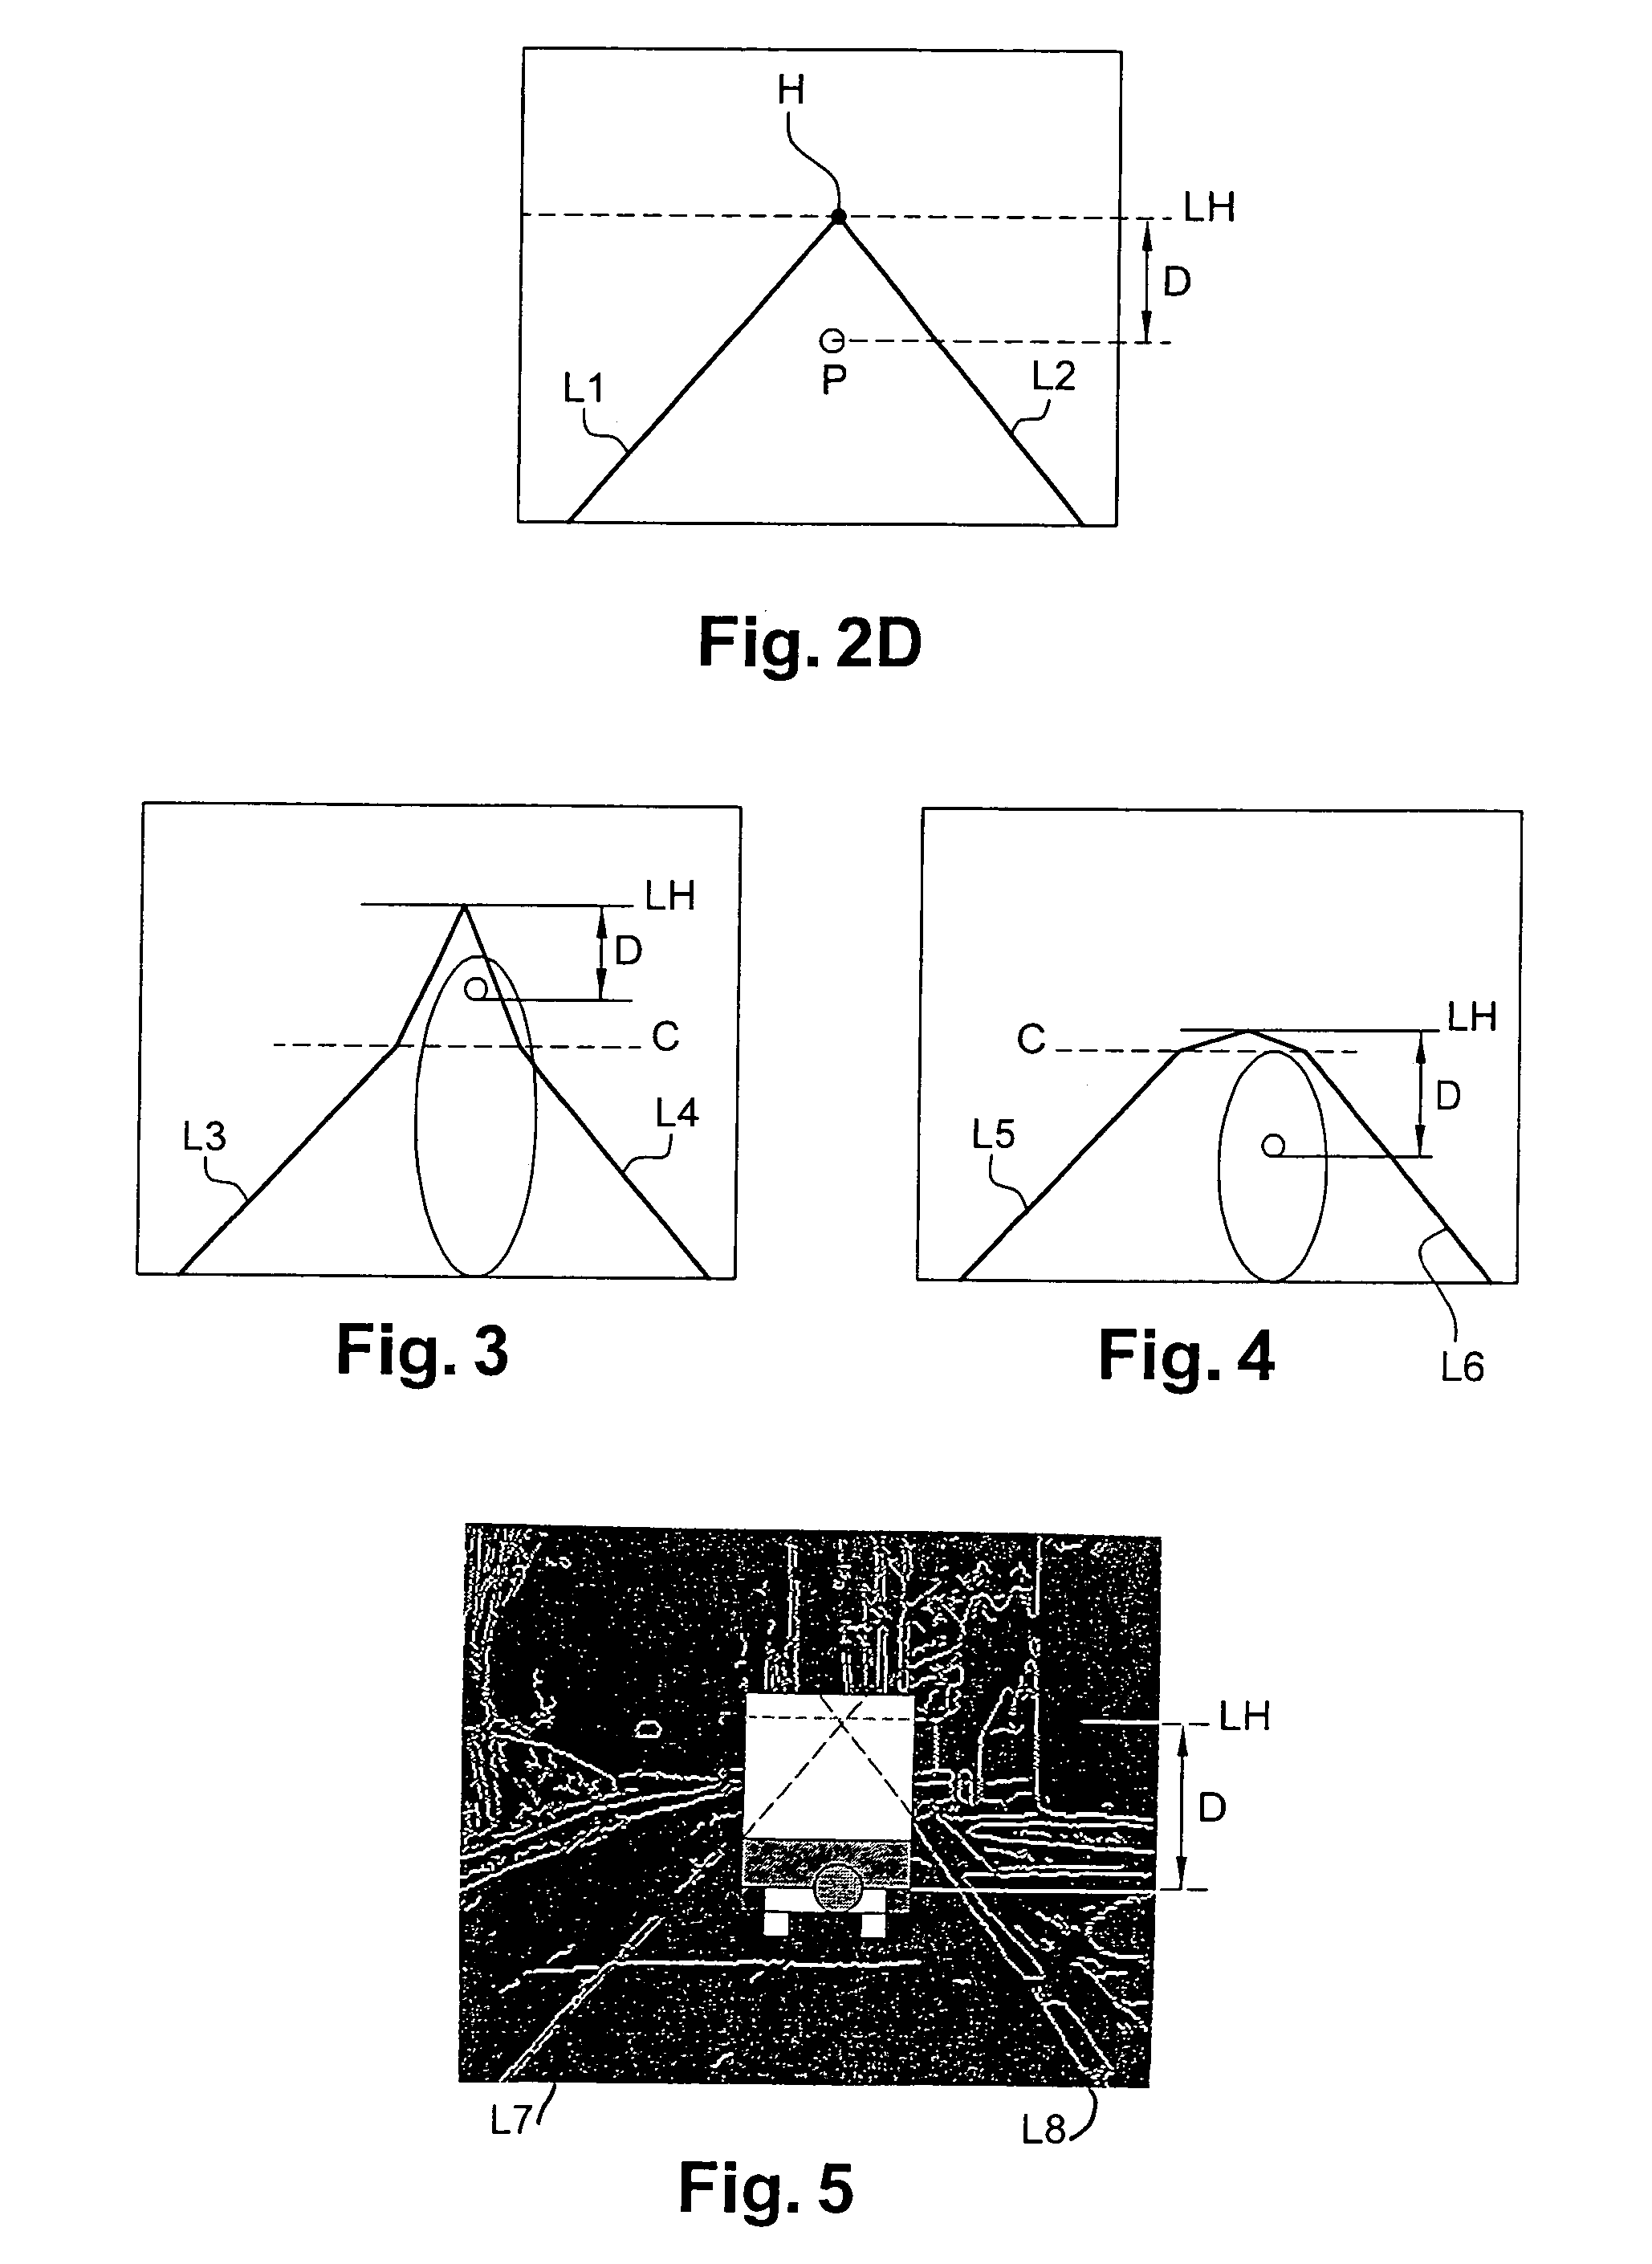 System for in-situ control of the orientation of a vehicle headlamp and process for its implementation